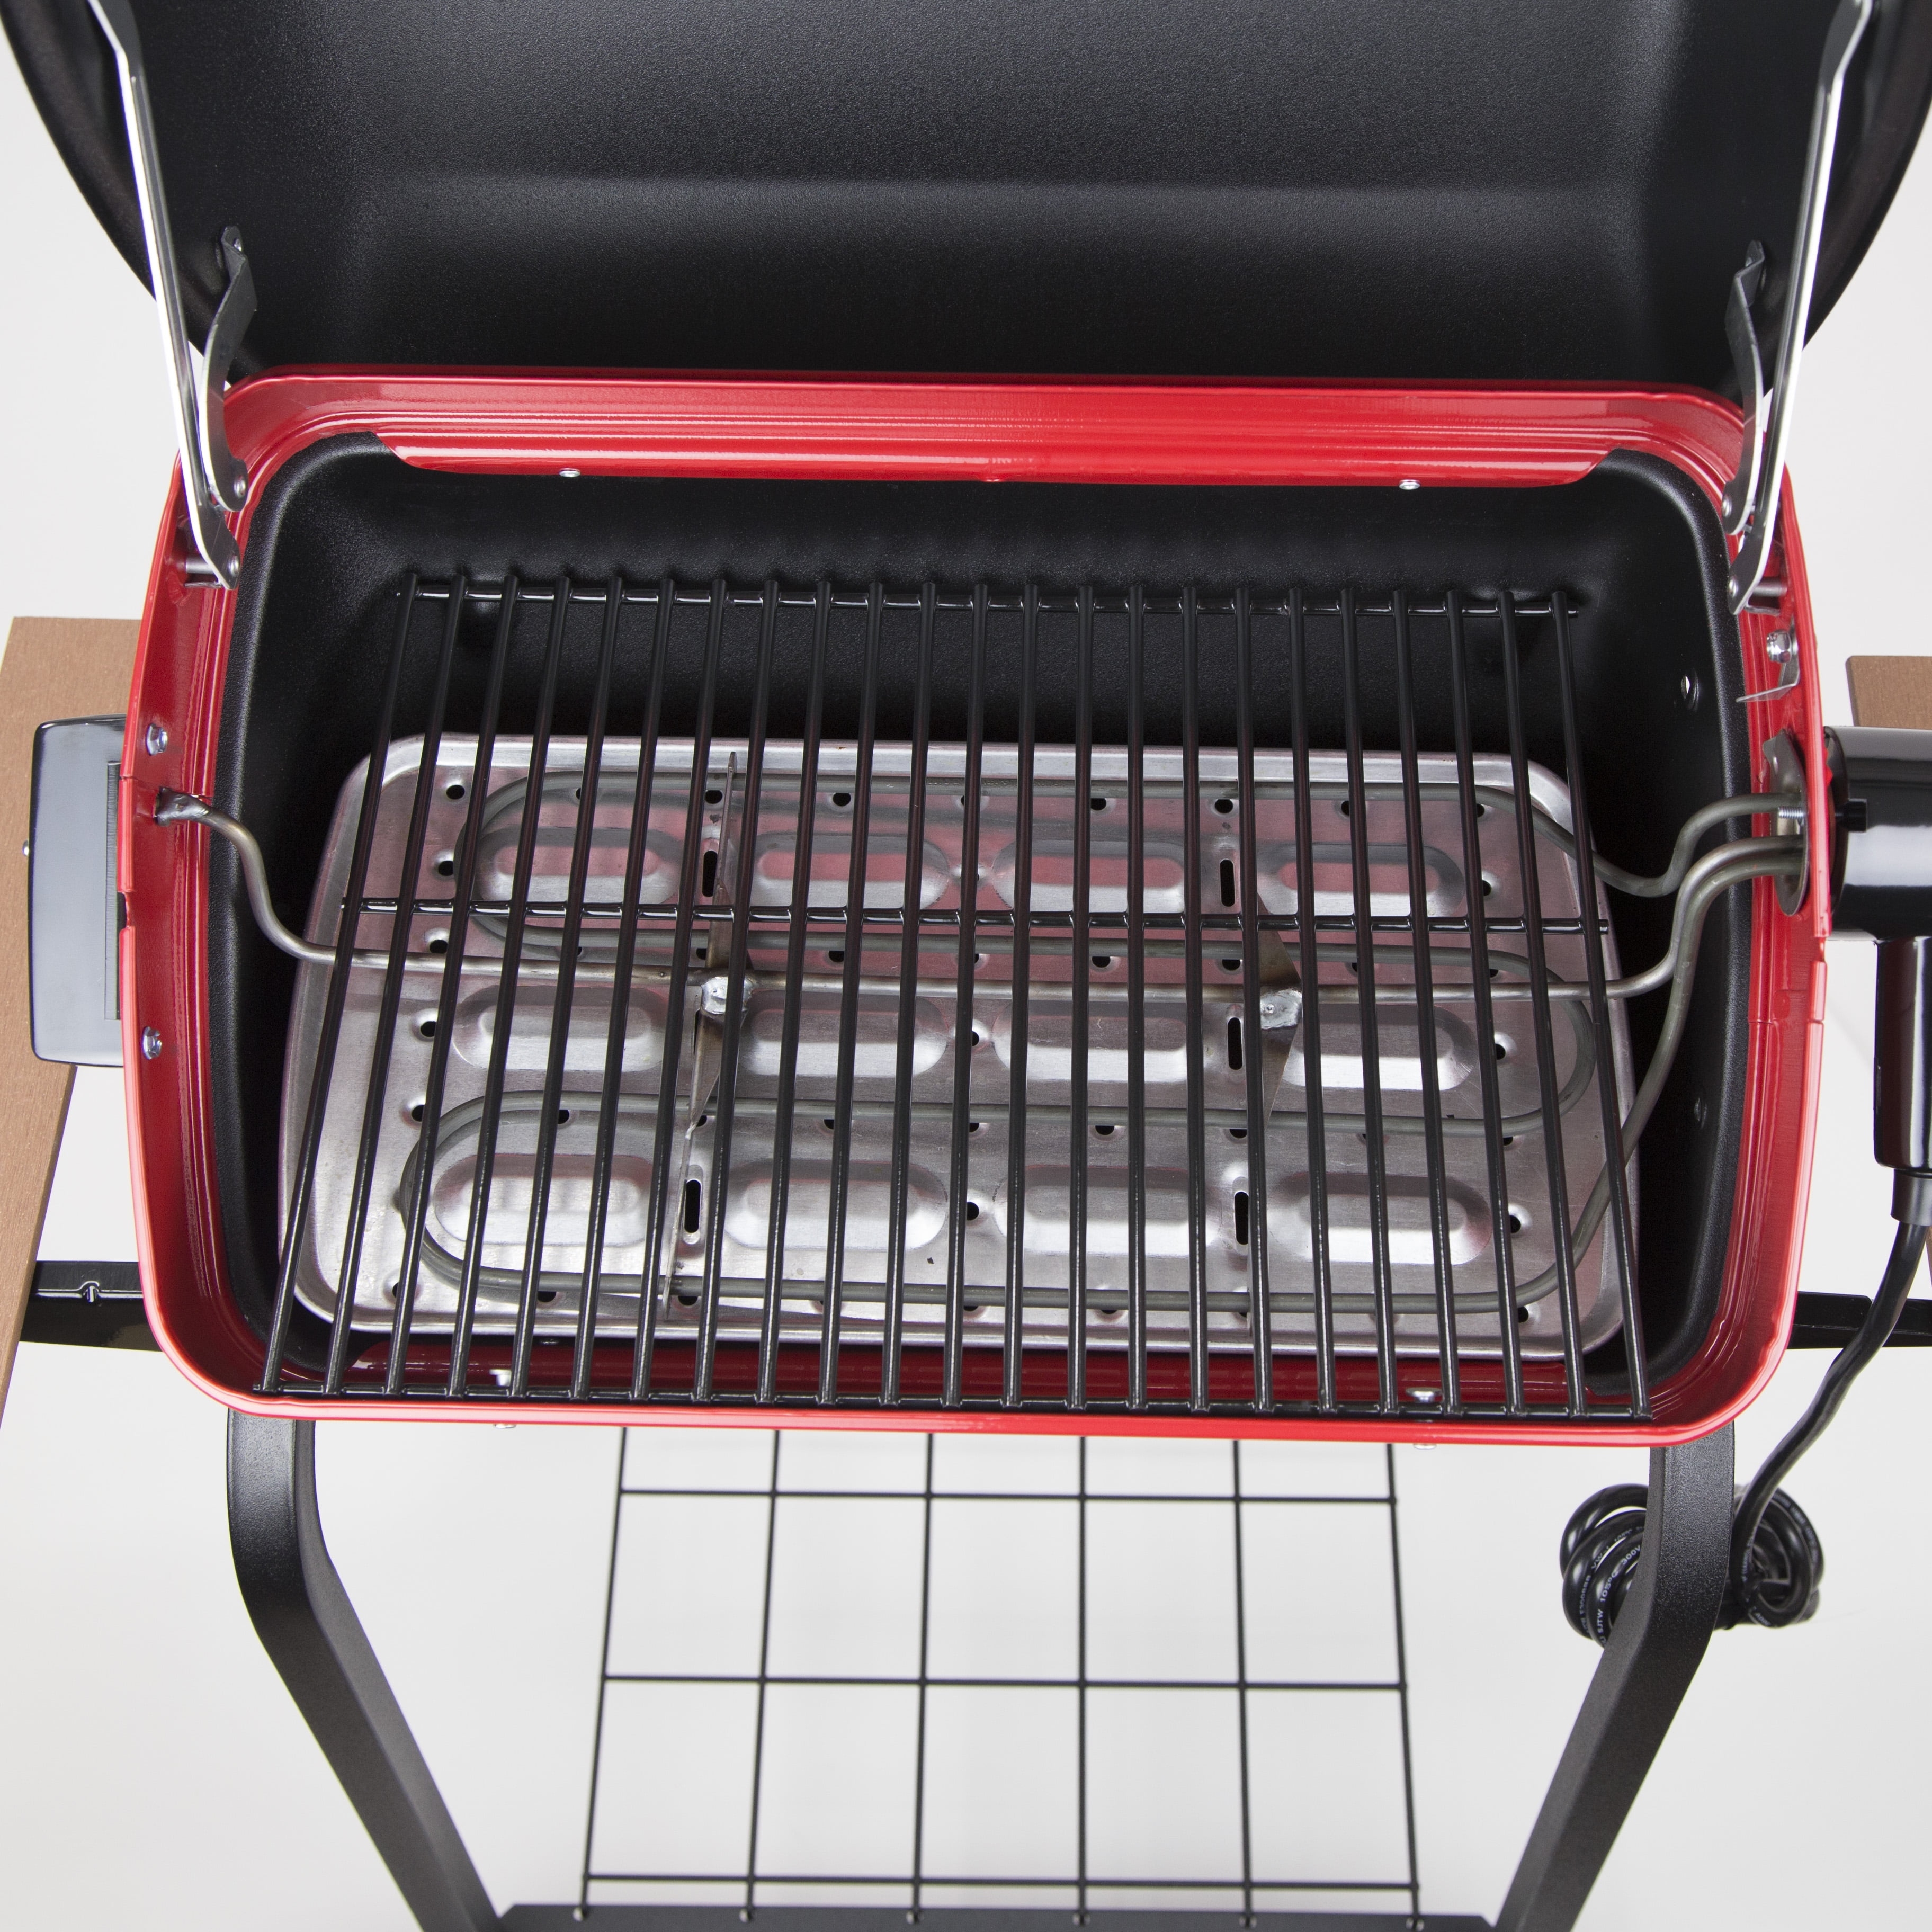 Americana Electric Cart Grill with Polymer Side Tables-Model 9350U8.181 –  MECO